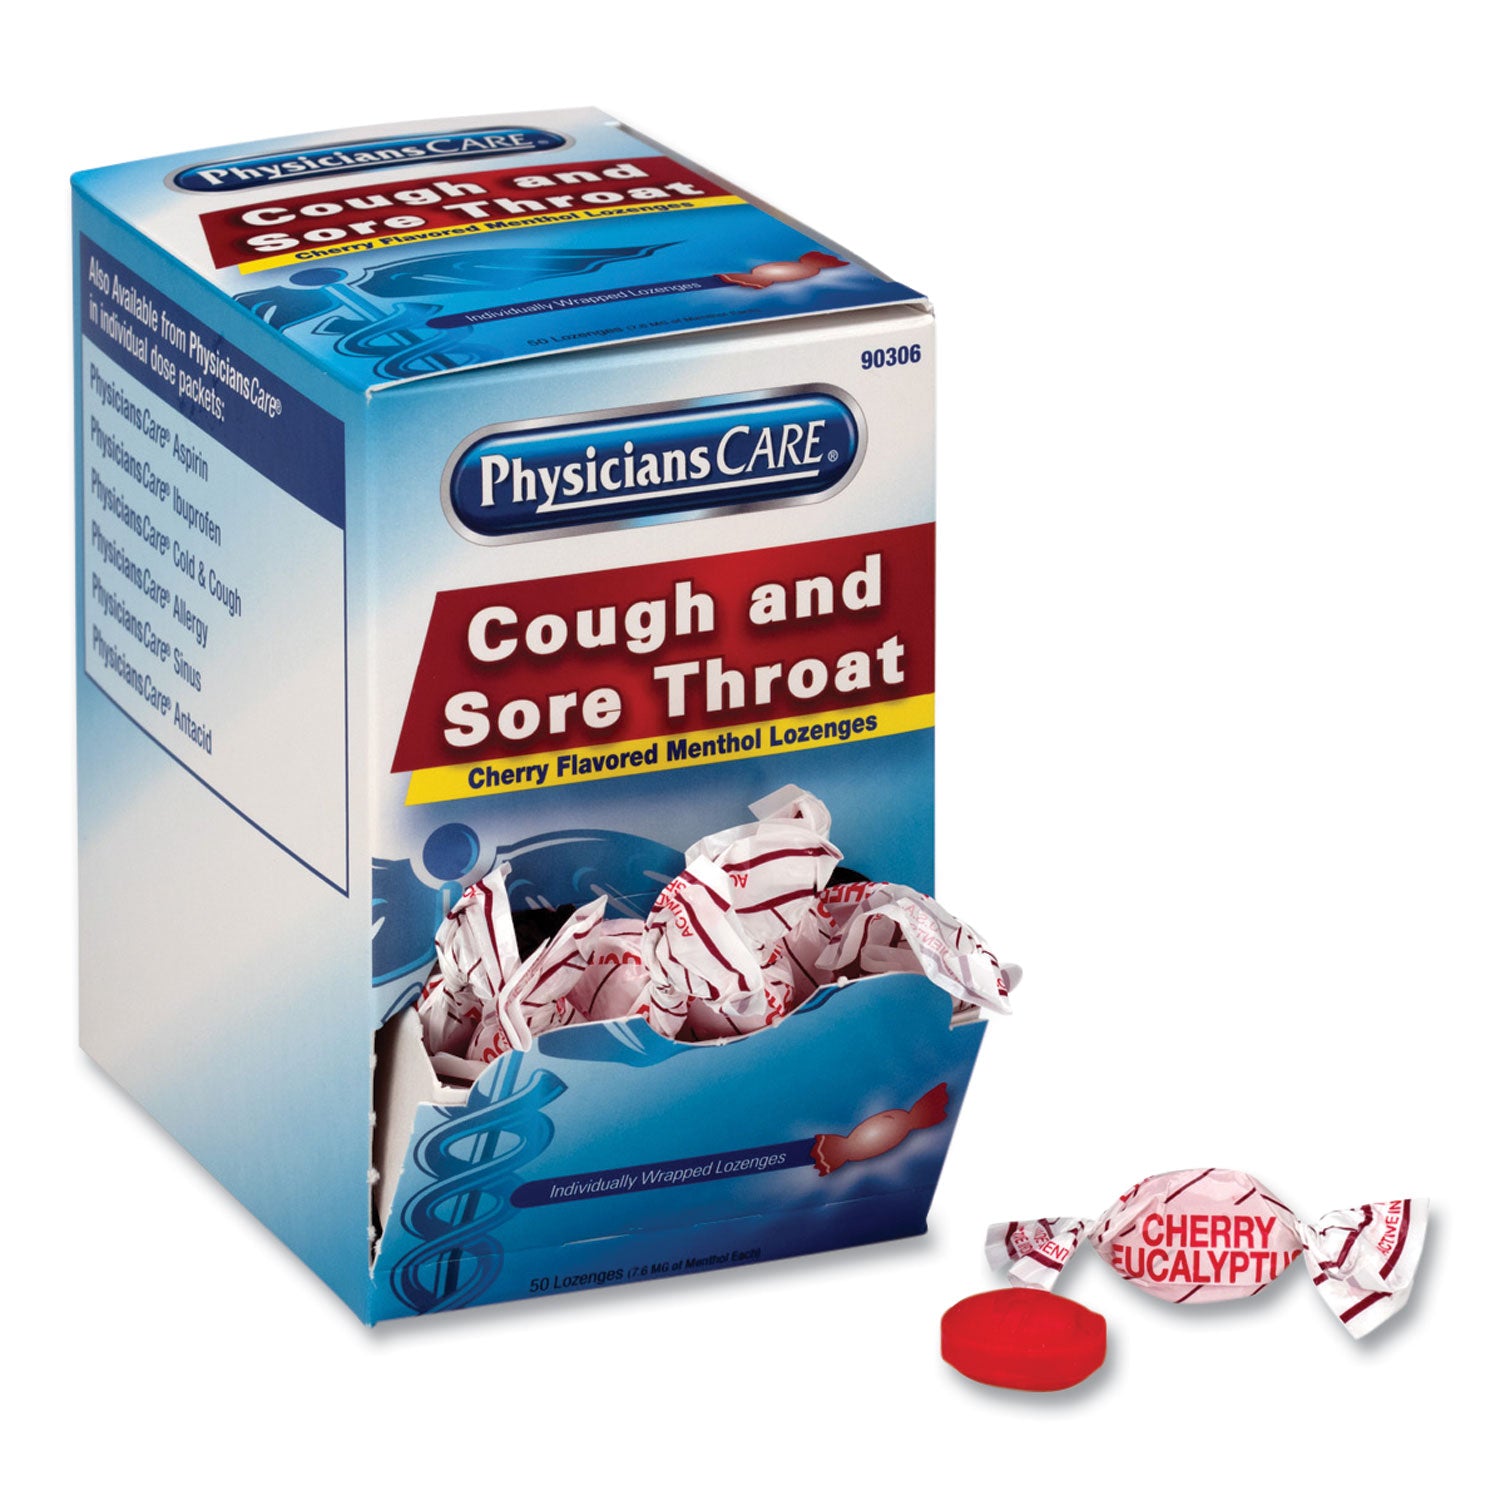 cough-and-sore-throat-cherry-menthol-lozenges-individually-wrapped-50-box_acm90306 - 1